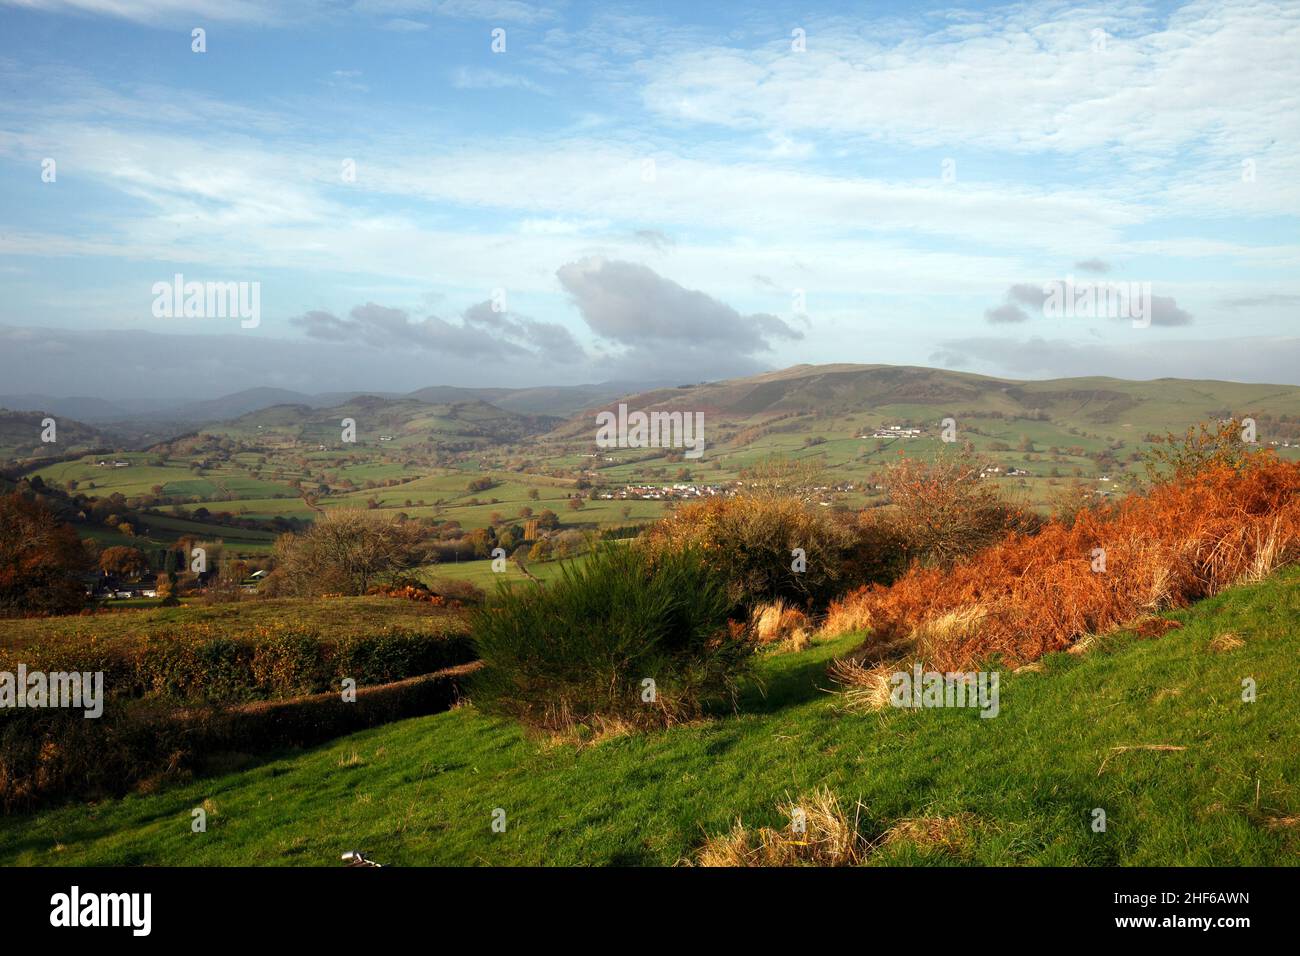 The Berwyn valley and mountain range on the border of North Wales and England. Stock Photo